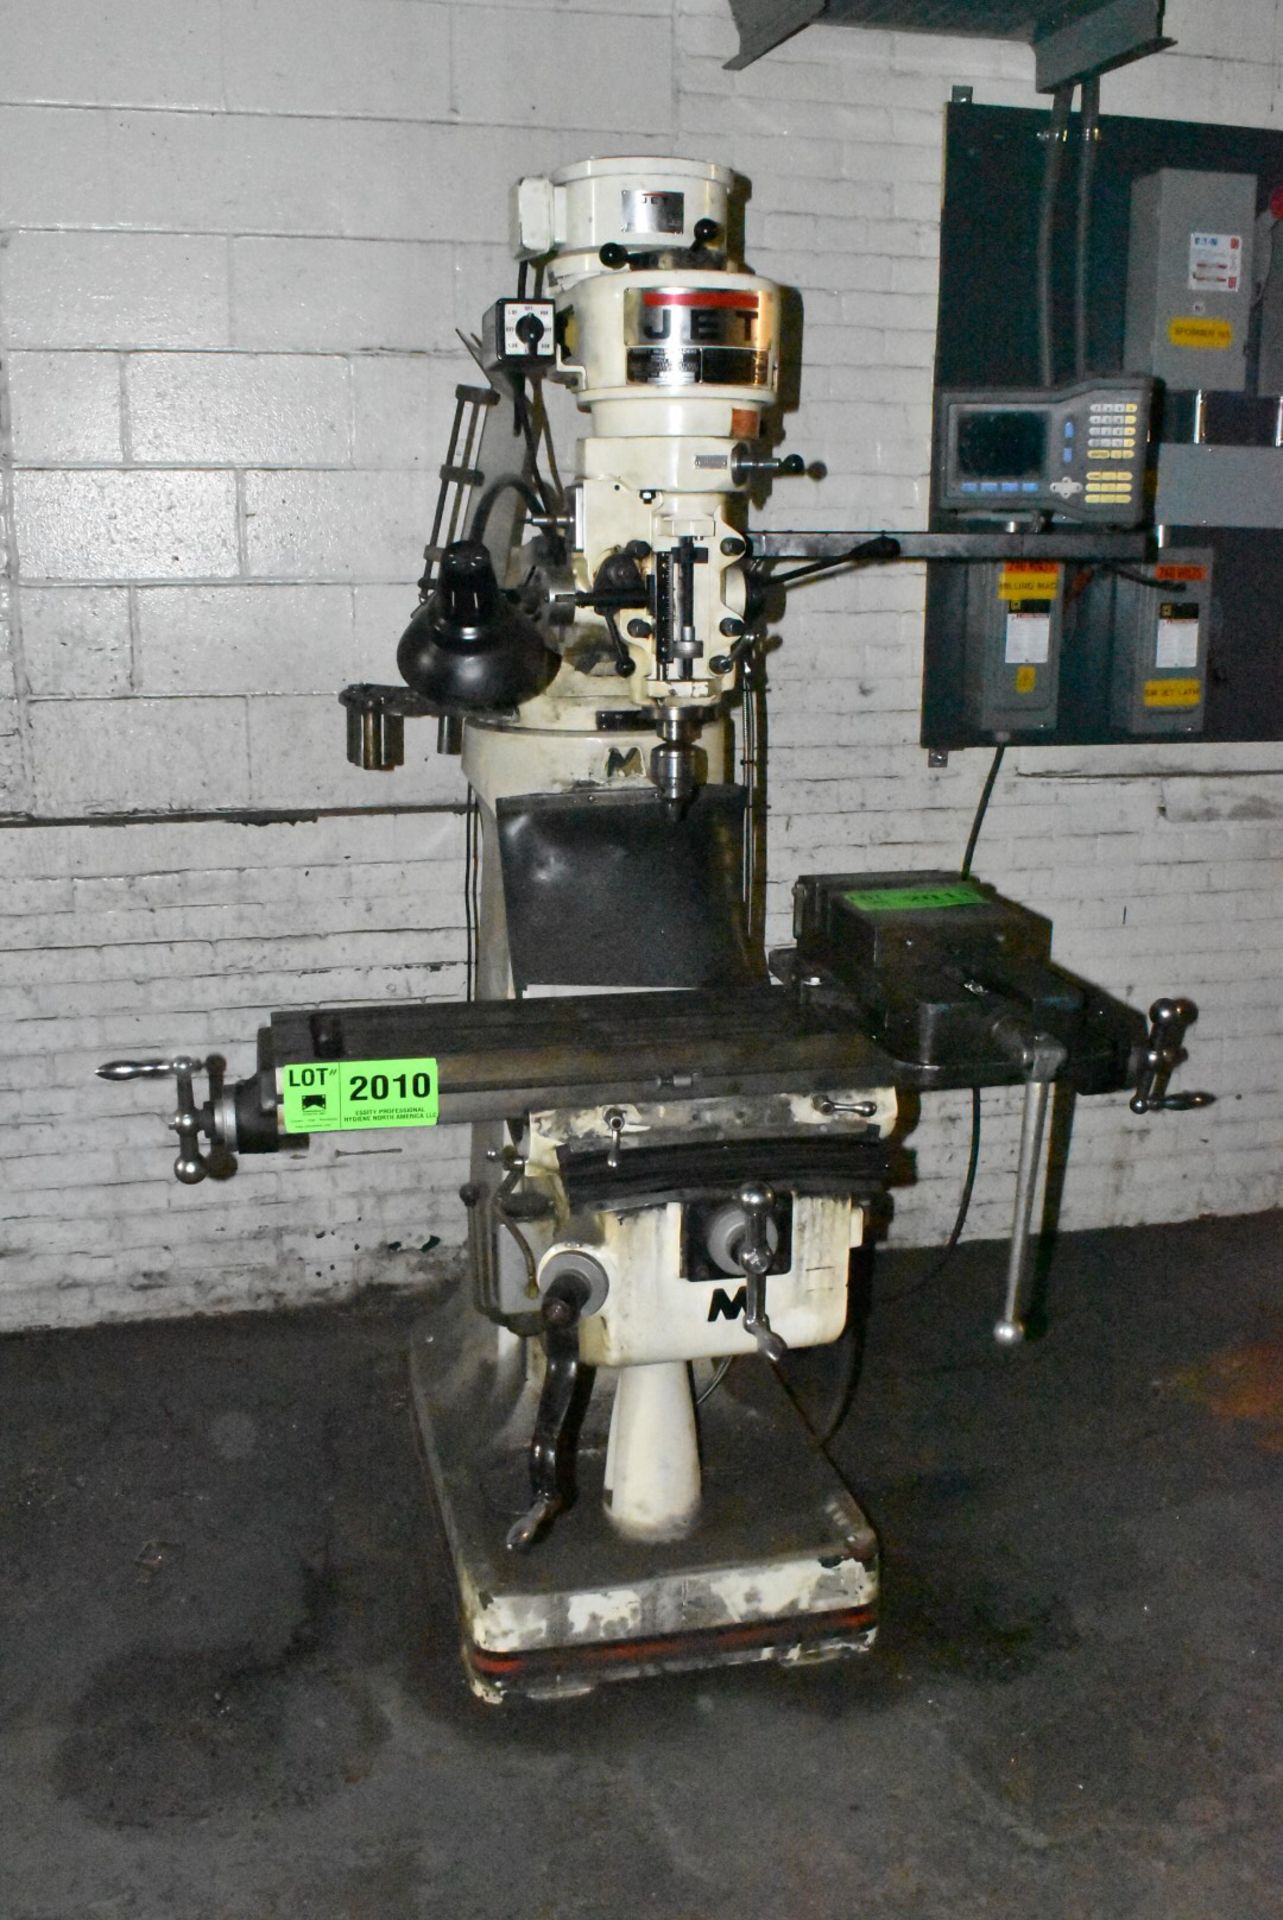 JET (2010) JTM-1 VERTICAL TURRET MILLING MACHINE WITH 9" X 42" TABLE, SPEEDS TO 2720 RPM IN 8 STEPS, - Image 2 of 9